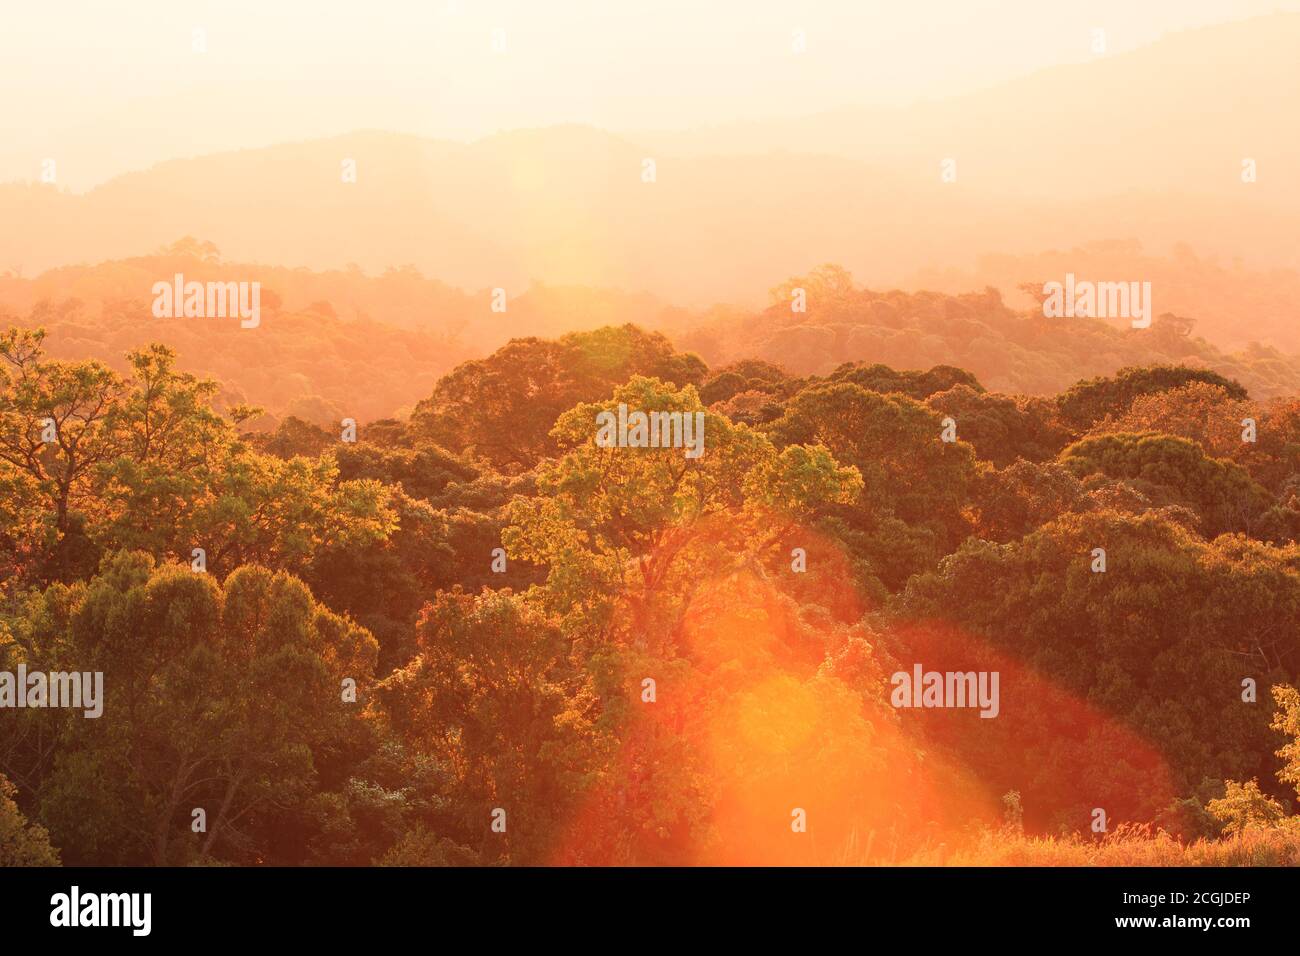 Glowing sun rising over canopy of Himalayas forest and mountains in the background. Stock Photo